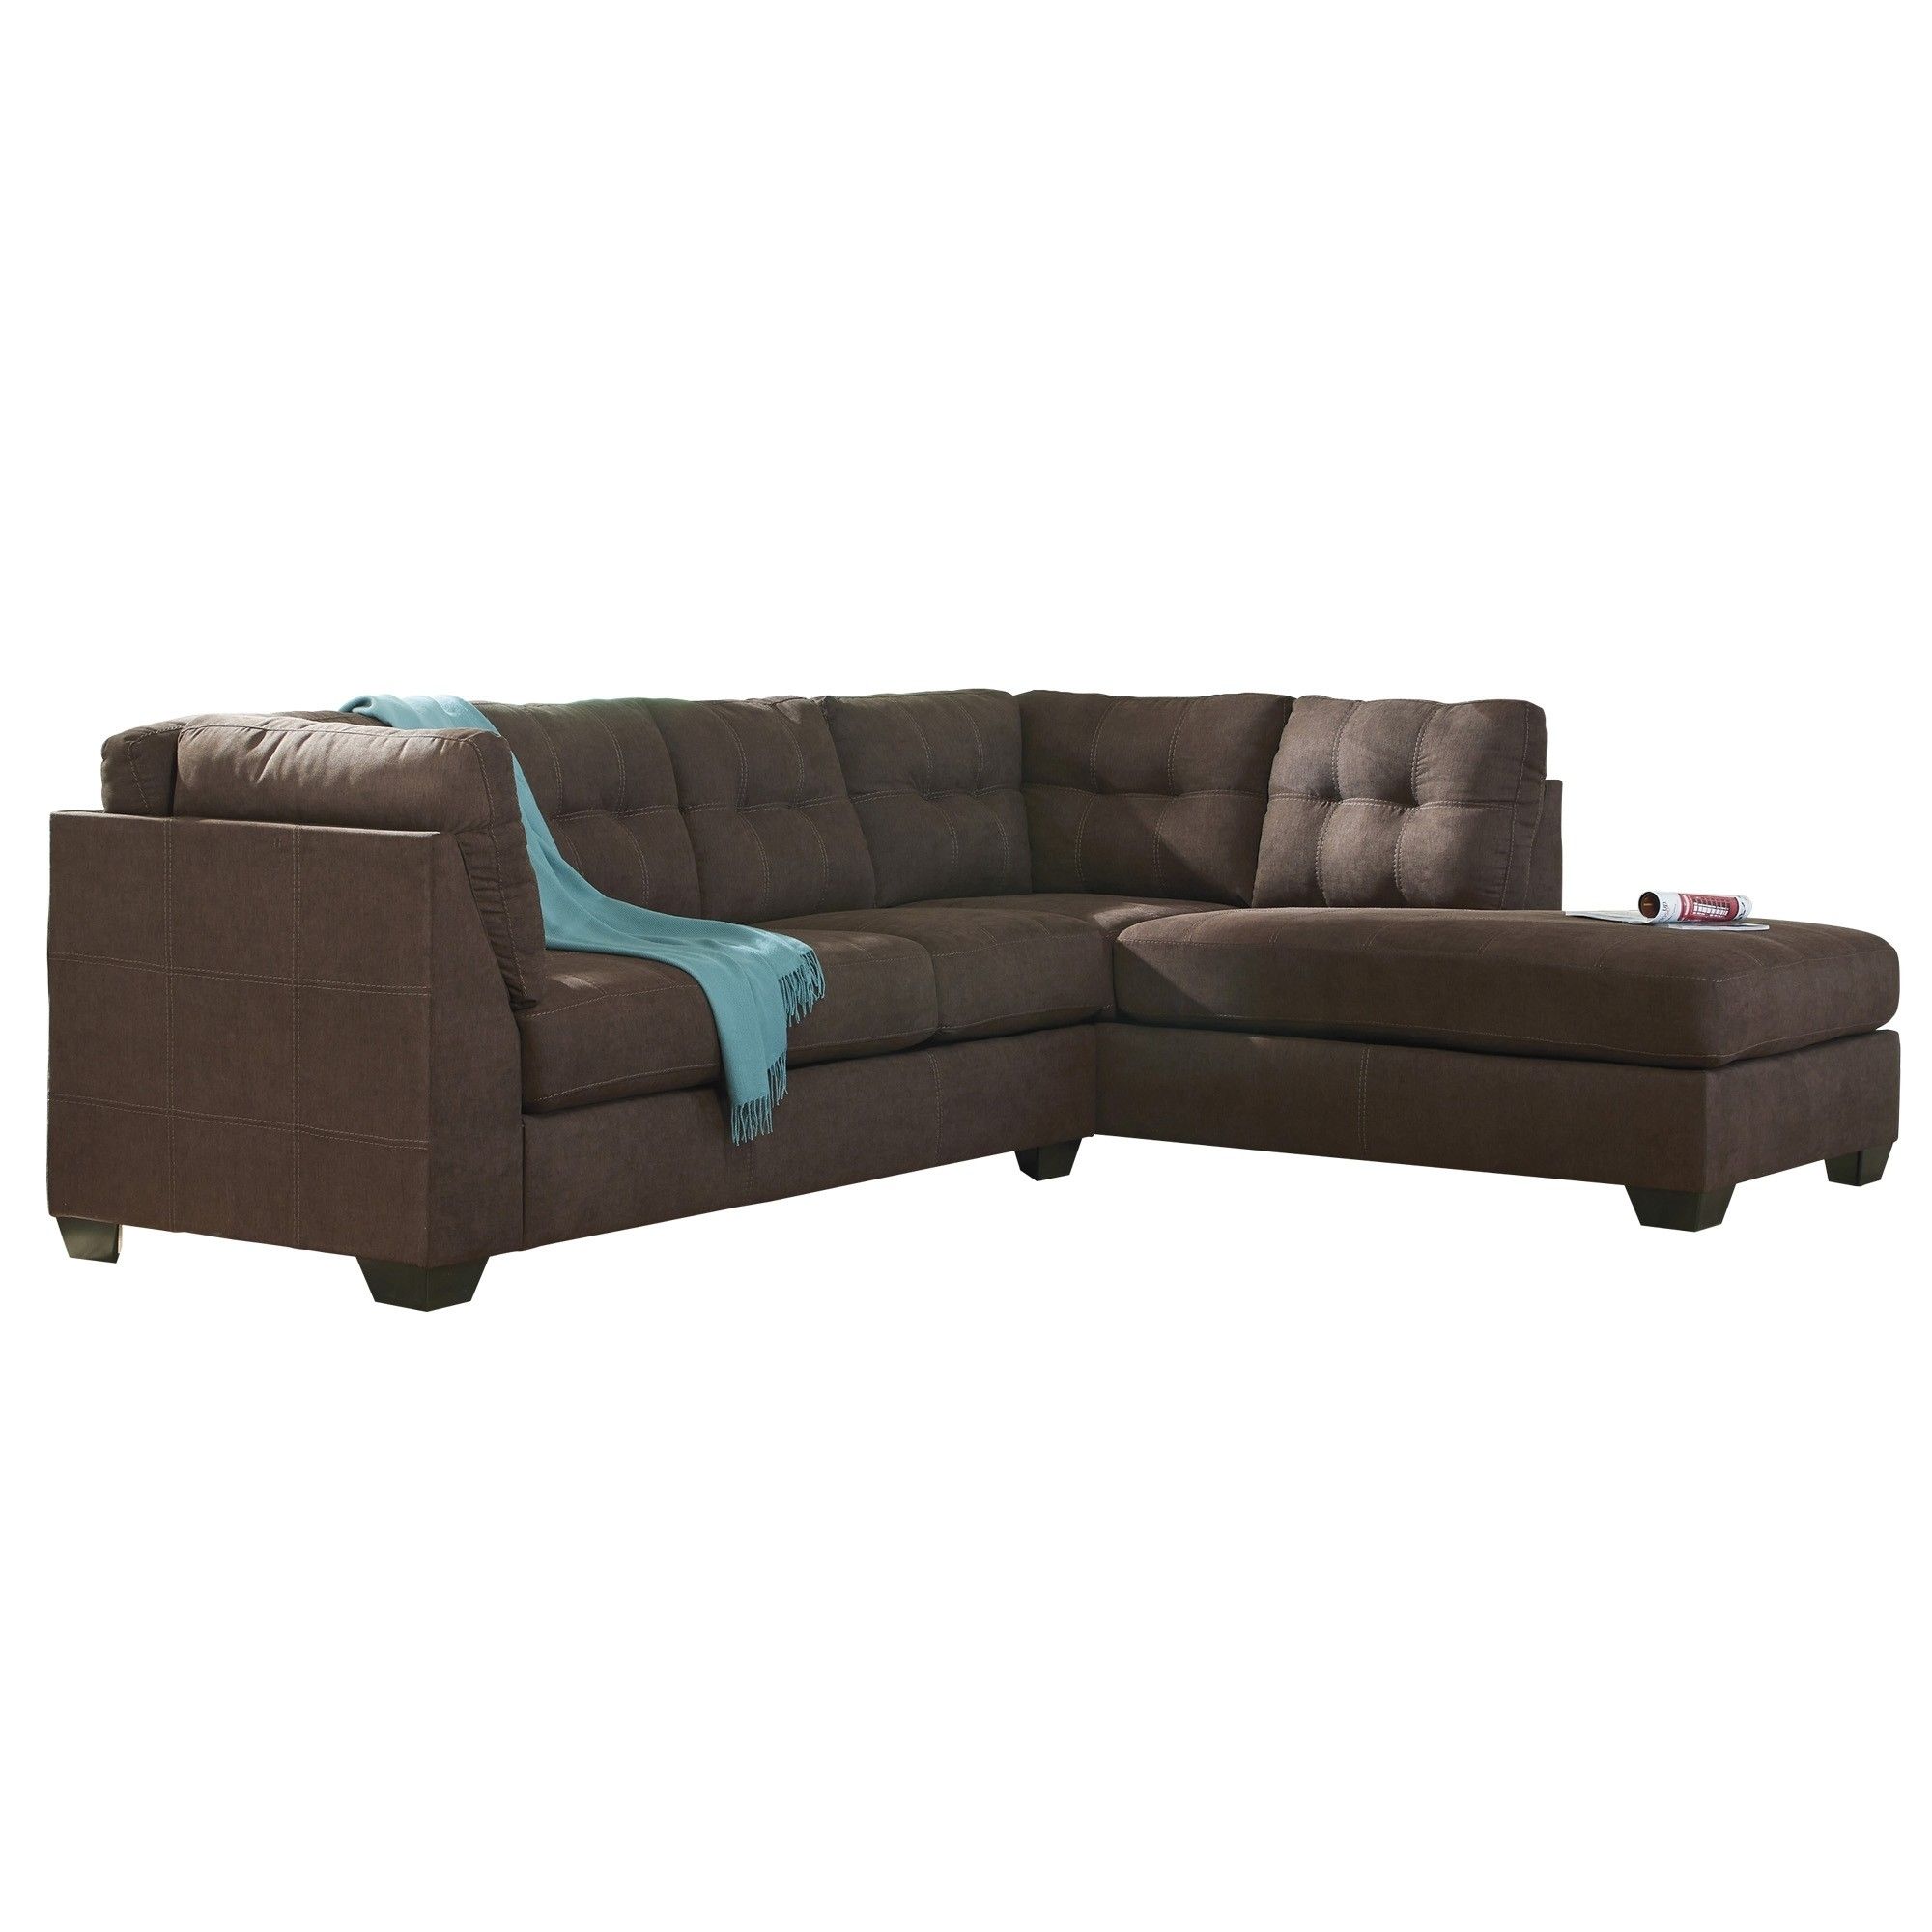 Maier 2 Piece Sectional With Sleeper | Tepperman's Throughout Teppermans Sectional Sofas (Photo 3 of 10)